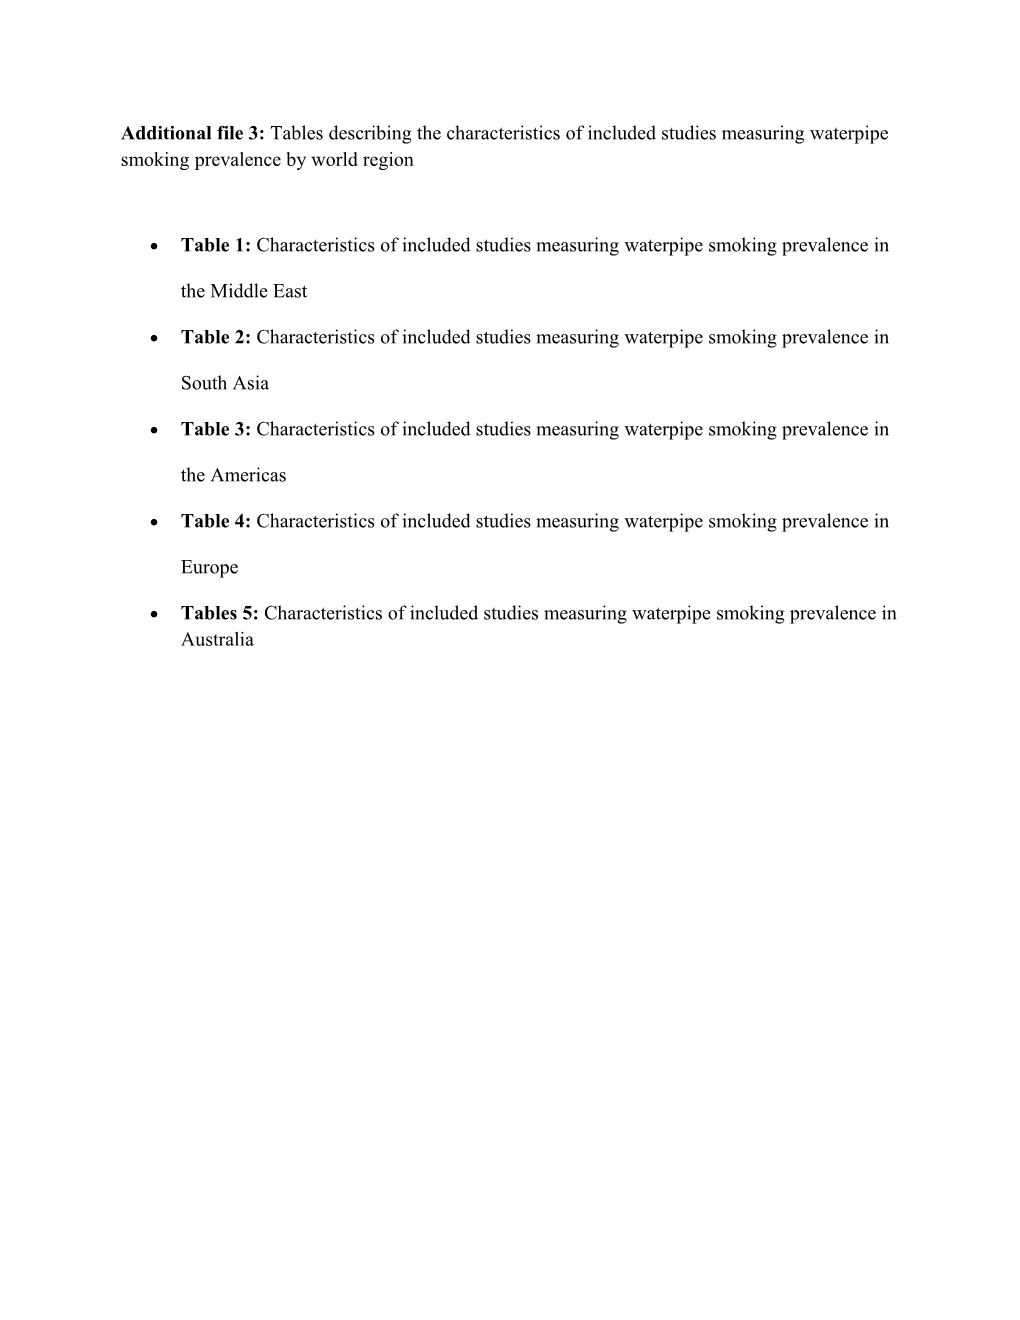 Additional File 3: Tables Describing the Characteristics of Included Studies Measuring